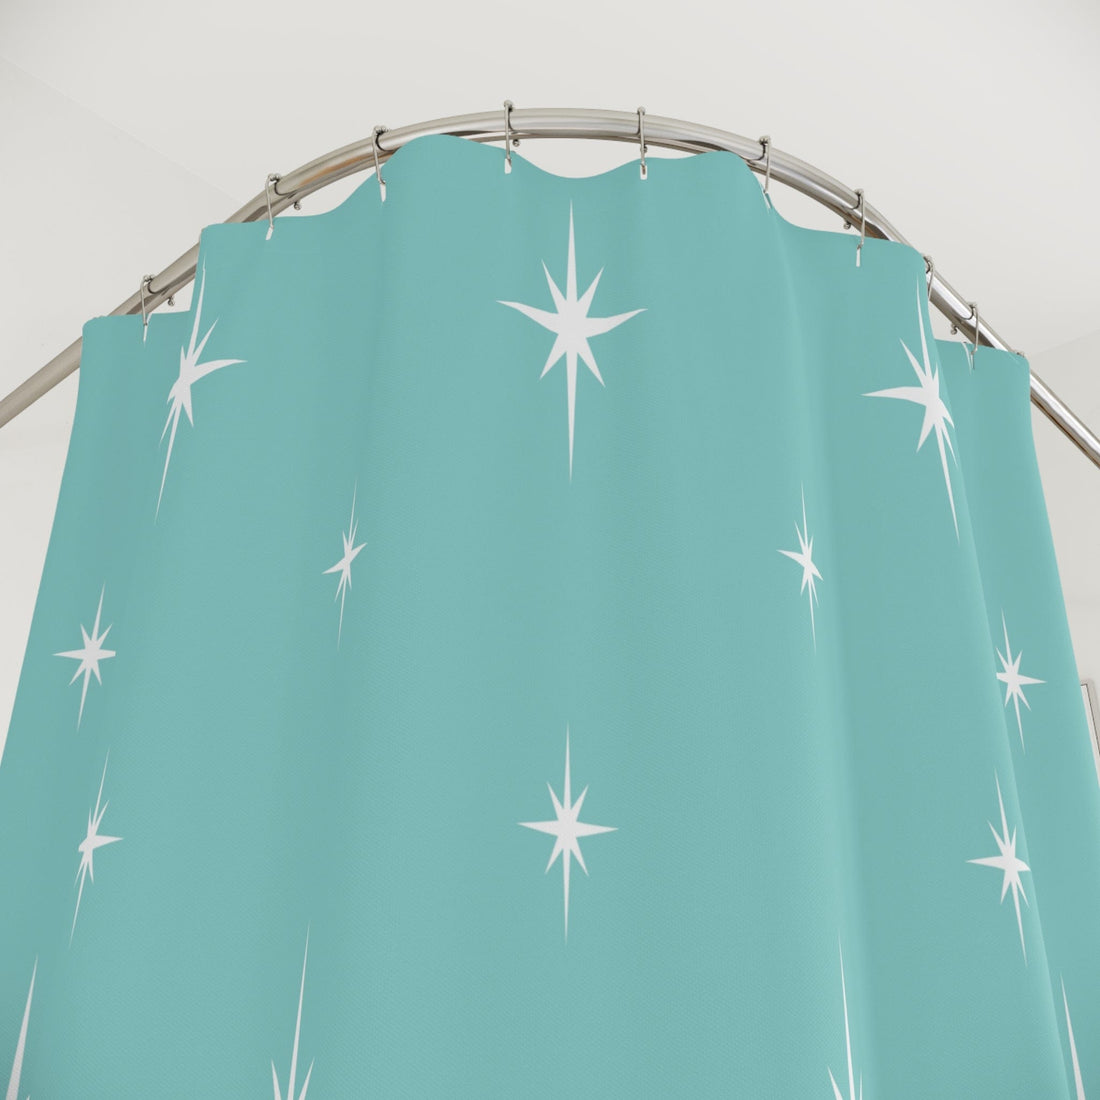 Kate McEnroe New York 50s Retro Mid Century Modern Atomic Starburst Shower Curtains in Vintage Turquoise and White Shower Curtains